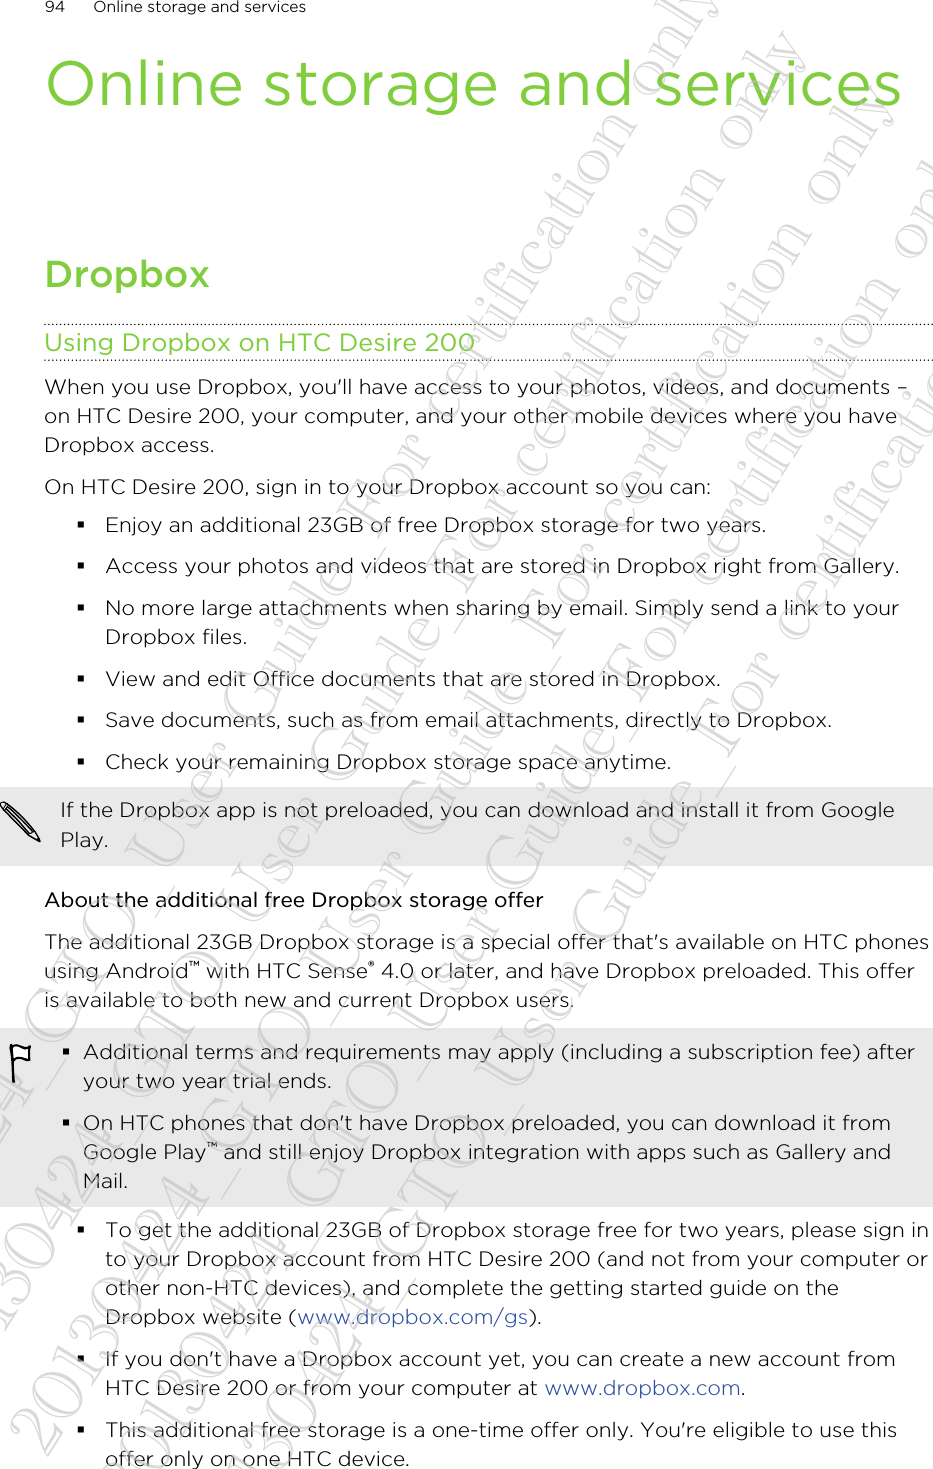 Online storage and servicesDropboxUsing Dropbox on HTC Desire 200When you use Dropbox, you&apos;ll have access to your photos, videos, and documents –on HTC Desire 200, your computer, and your other mobile devices where you haveDropbox access.On HTC Desire 200, sign in to your Dropbox account so you can:§Enjoy an additional 23GB of free Dropbox storage for two years.§Access your photos and videos that are stored in Dropbox right from Gallery.§No more large attachments when sharing by email. Simply send a link to yourDropbox files.§View and edit Office documents that are stored in Dropbox.§Save documents, such as from email attachments, directly to Dropbox.§Check your remaining Dropbox storage space anytime.If the Dropbox app is not preloaded, you can download and install it from GooglePlay.About the additional free Dropbox storage offerThe additional 23GB Dropbox storage is a special offer that&apos;s available on HTC phonesusing Android™ with HTC Sense® 4.0 or later, and have Dropbox preloaded. This offeris available to both new and current Dropbox users.§Additional terms and requirements may apply (including a subscription fee) afteryour two year trial ends.§On HTC phones that don&apos;t have Dropbox preloaded, you can download it fromGoogle Play™ and still enjoy Dropbox integration with apps such as Gallery andMail.§To get the additional 23GB of Dropbox storage free for two years, please sign into your Dropbox account from HTC Desire 200 (and not from your computer orother non-HTC devices), and complete the getting started guide on theDropbox website (www.dropbox.com/gs).§If you don&apos;t have a Dropbox account yet, you can create a new account fromHTC Desire 200 or from your computer at www.dropbox.com.§This additional free storage is a one-time offer only. You&apos;re eligible to use thisoffer only on one HTC device.94 Online storage and services20130424_GTO_User Guide_For certification only 20130424_GTO_User Guide_For certification only 20130424_GTO_User Guide_For certification only 20130424_GTO_User Guide_For certification only 20130424_GTO_User Guide_For certification only